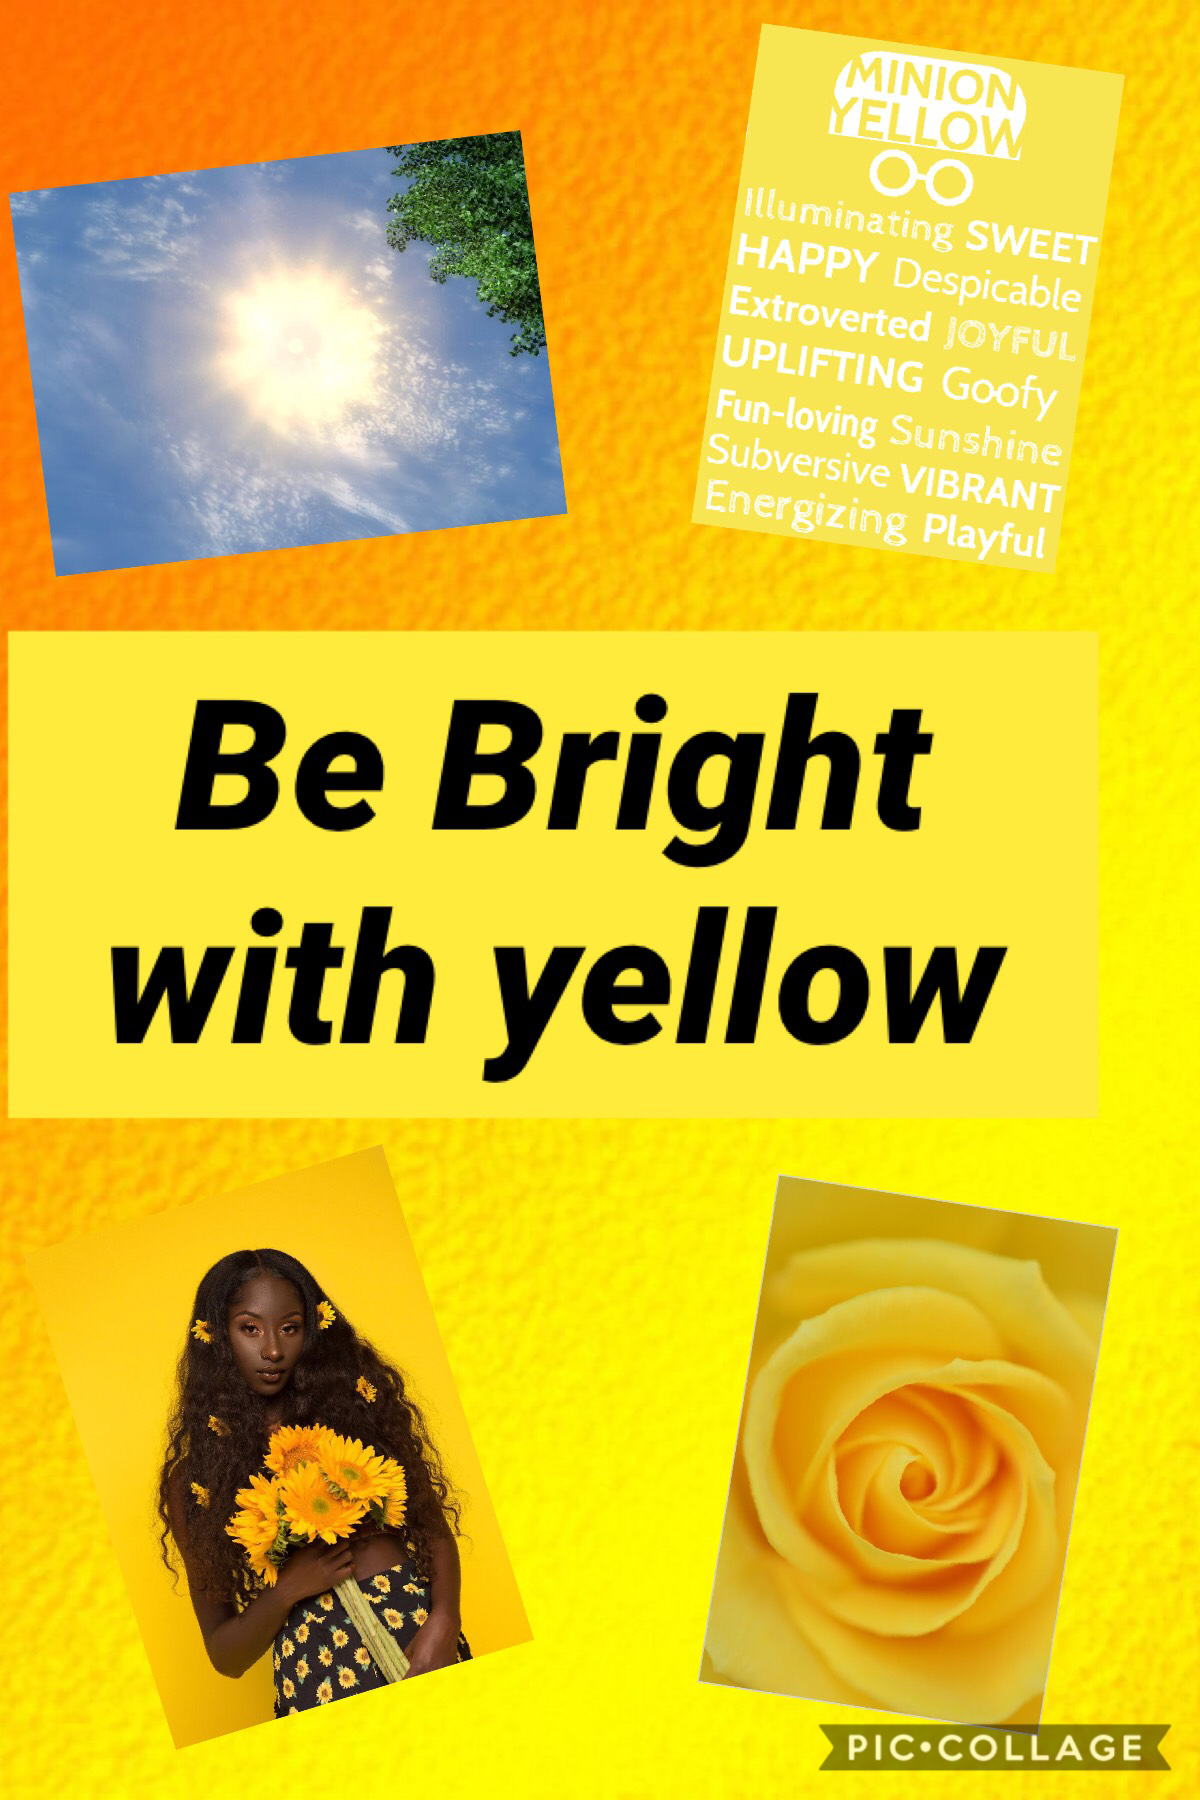 Be bright with yellow, this is one of the best ones I made, also follow me yall